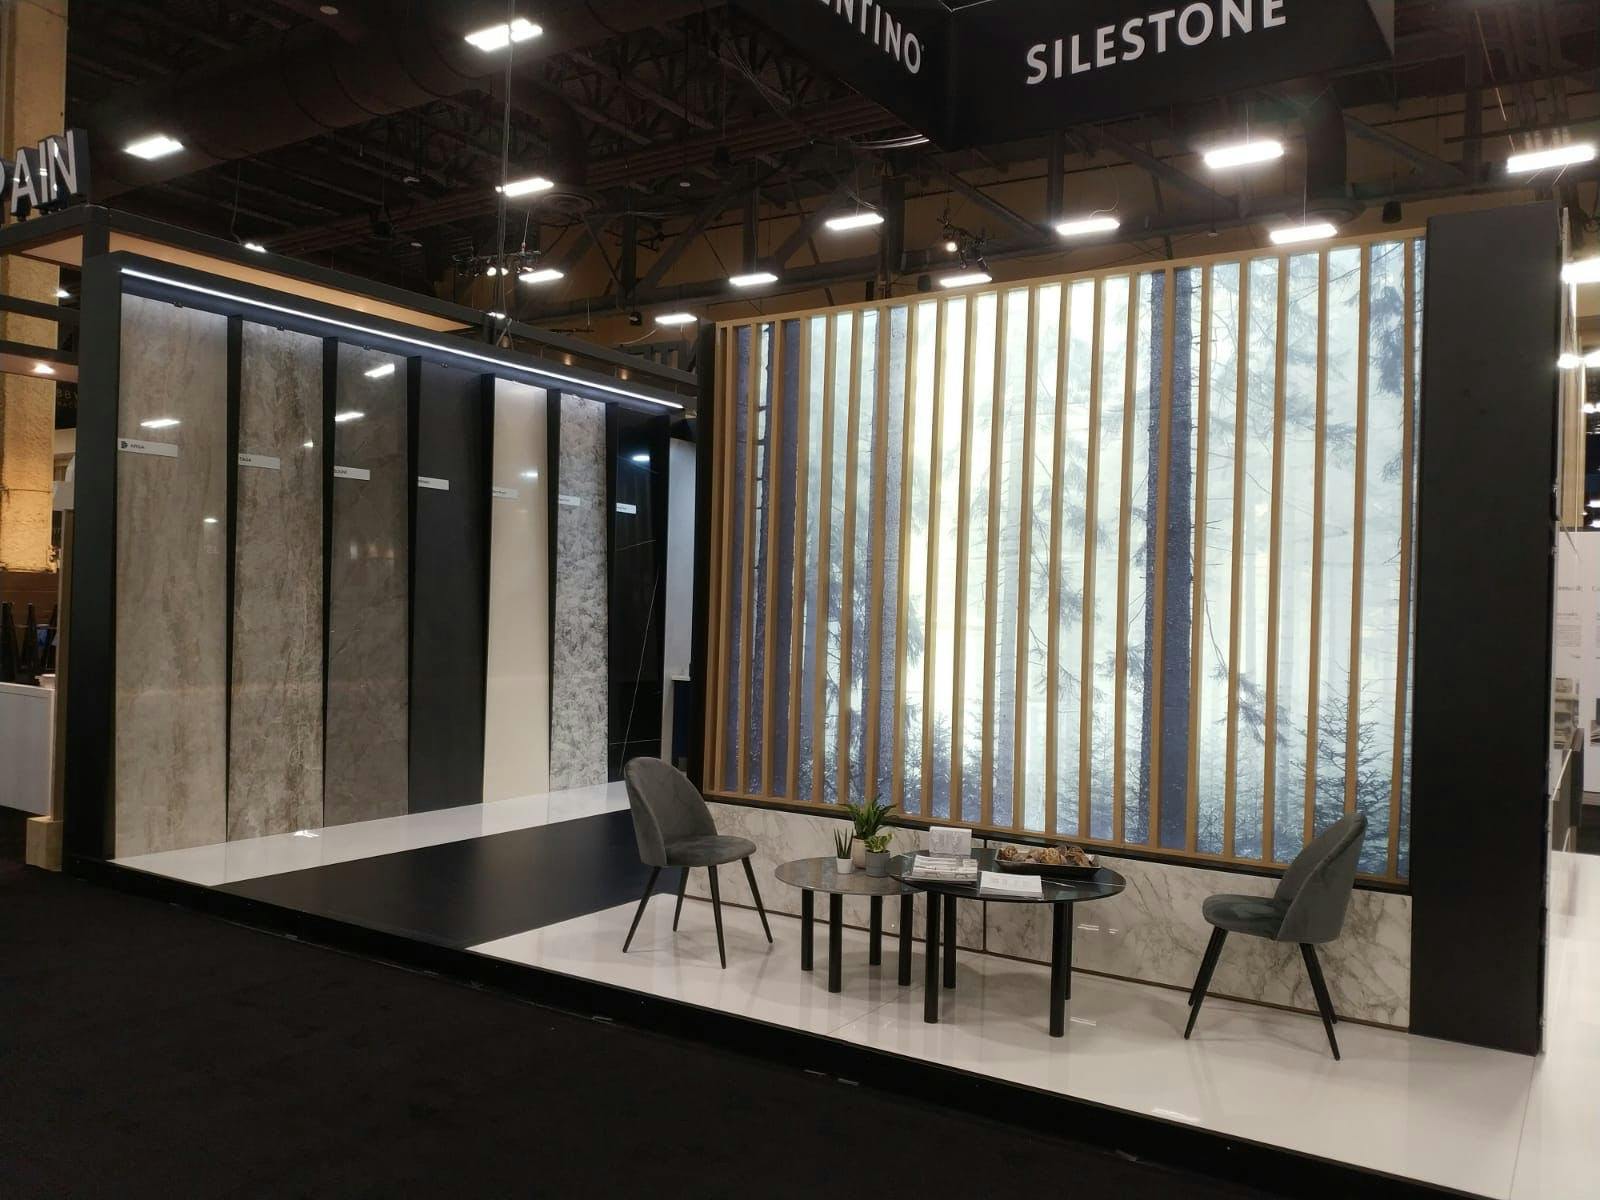 Image 32 of d935b990 8a1b 4685 91a8 cdd1a894ac98 1 in Cosentino Highlights Silestone and Dekton Offerings at HD Expo 2019 - Cosentino